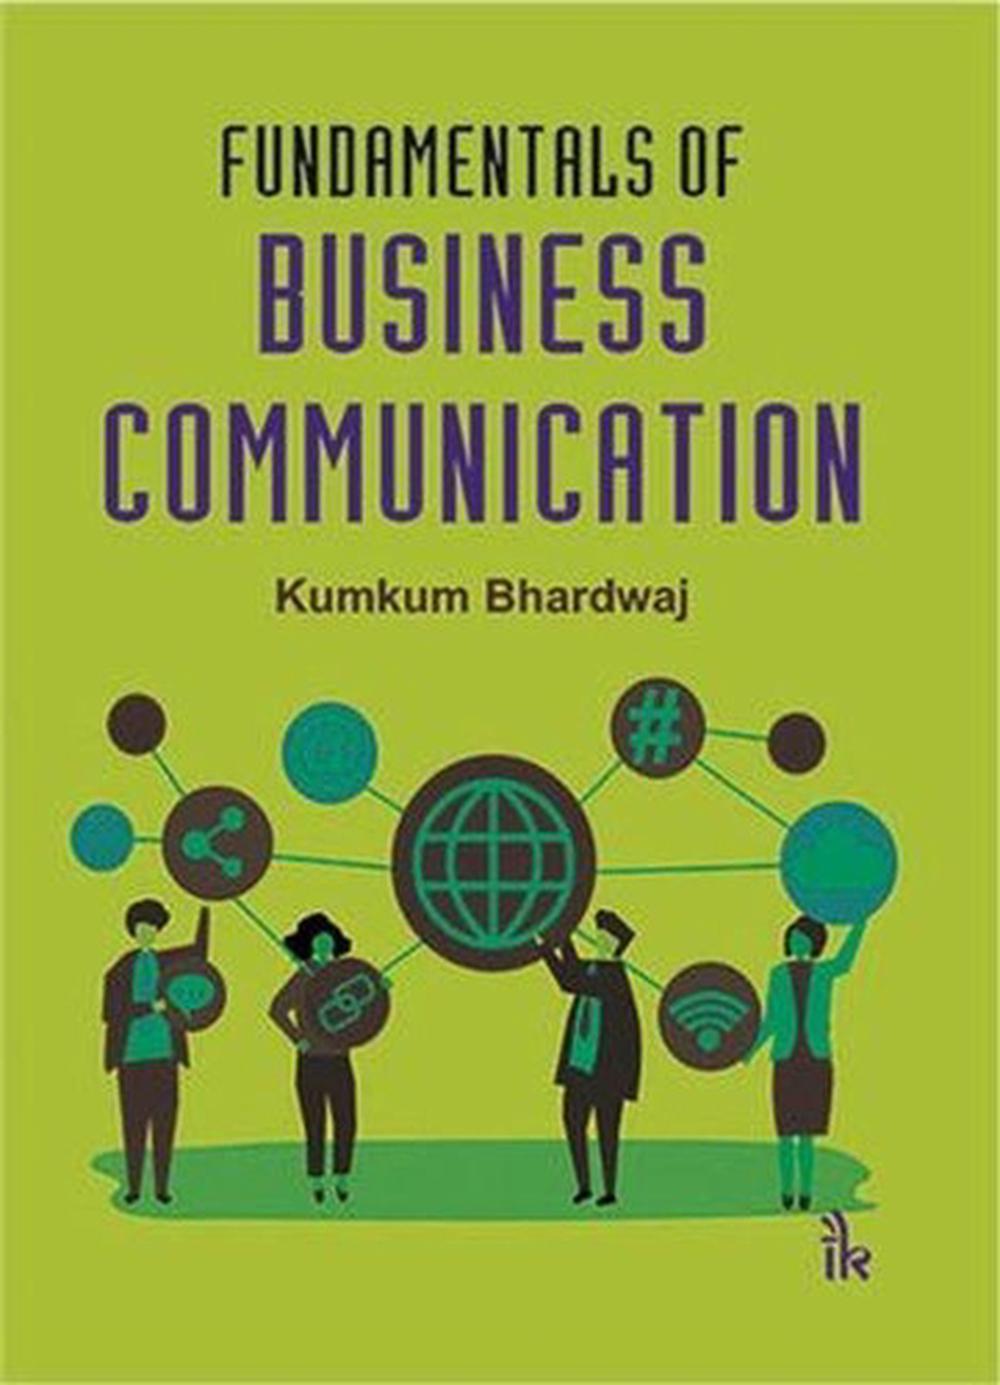 thesis about business communication